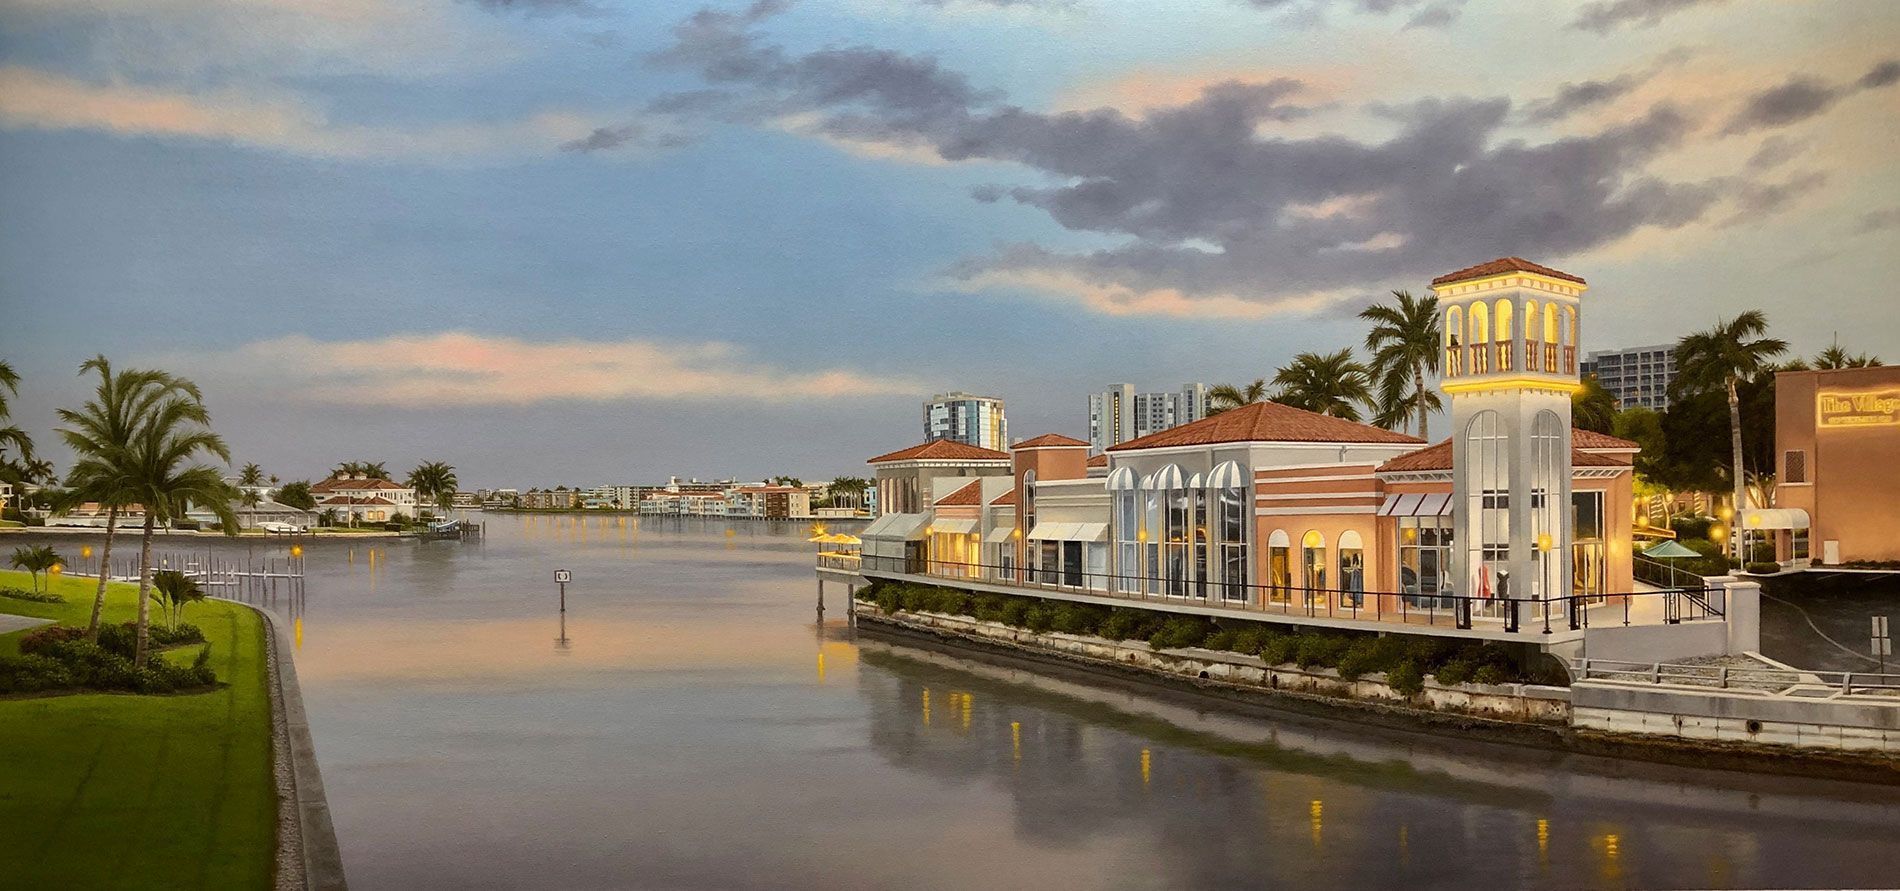 Photorealistic painting of a sunset over the Naples waterways